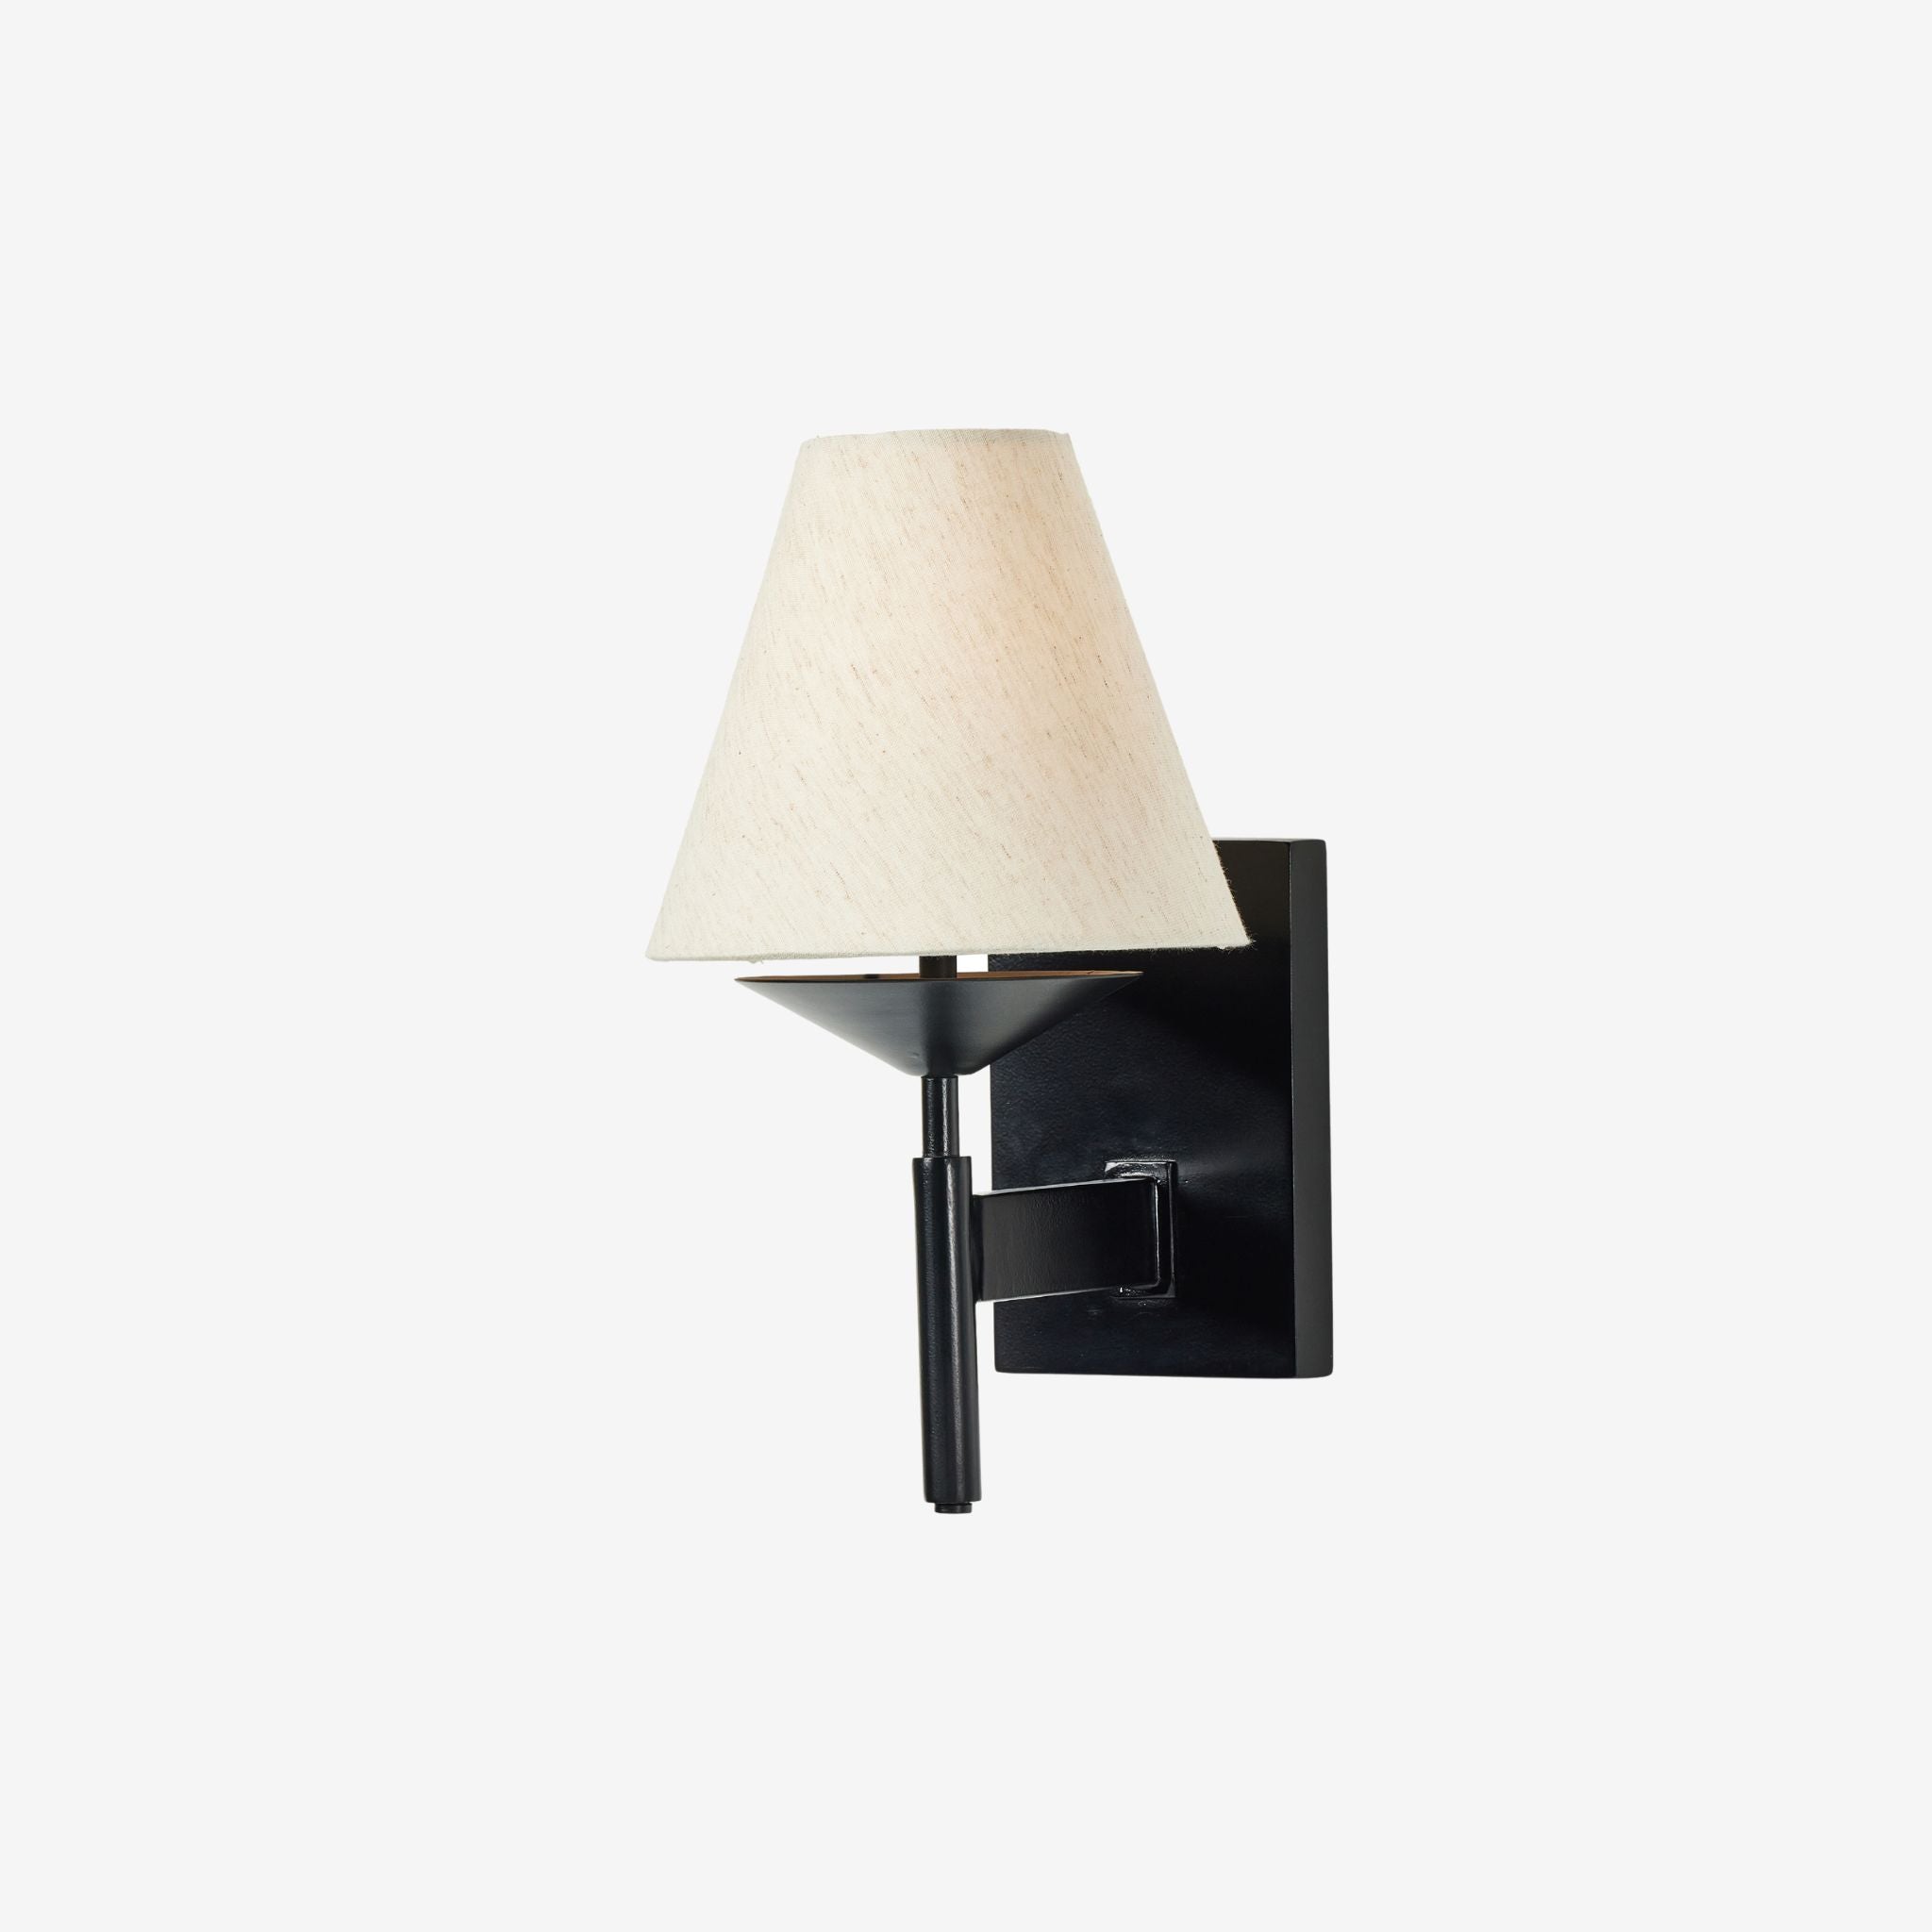 DODIE SCONCE-JET BLACK - Simply Elevated Home Furnishing SLC 